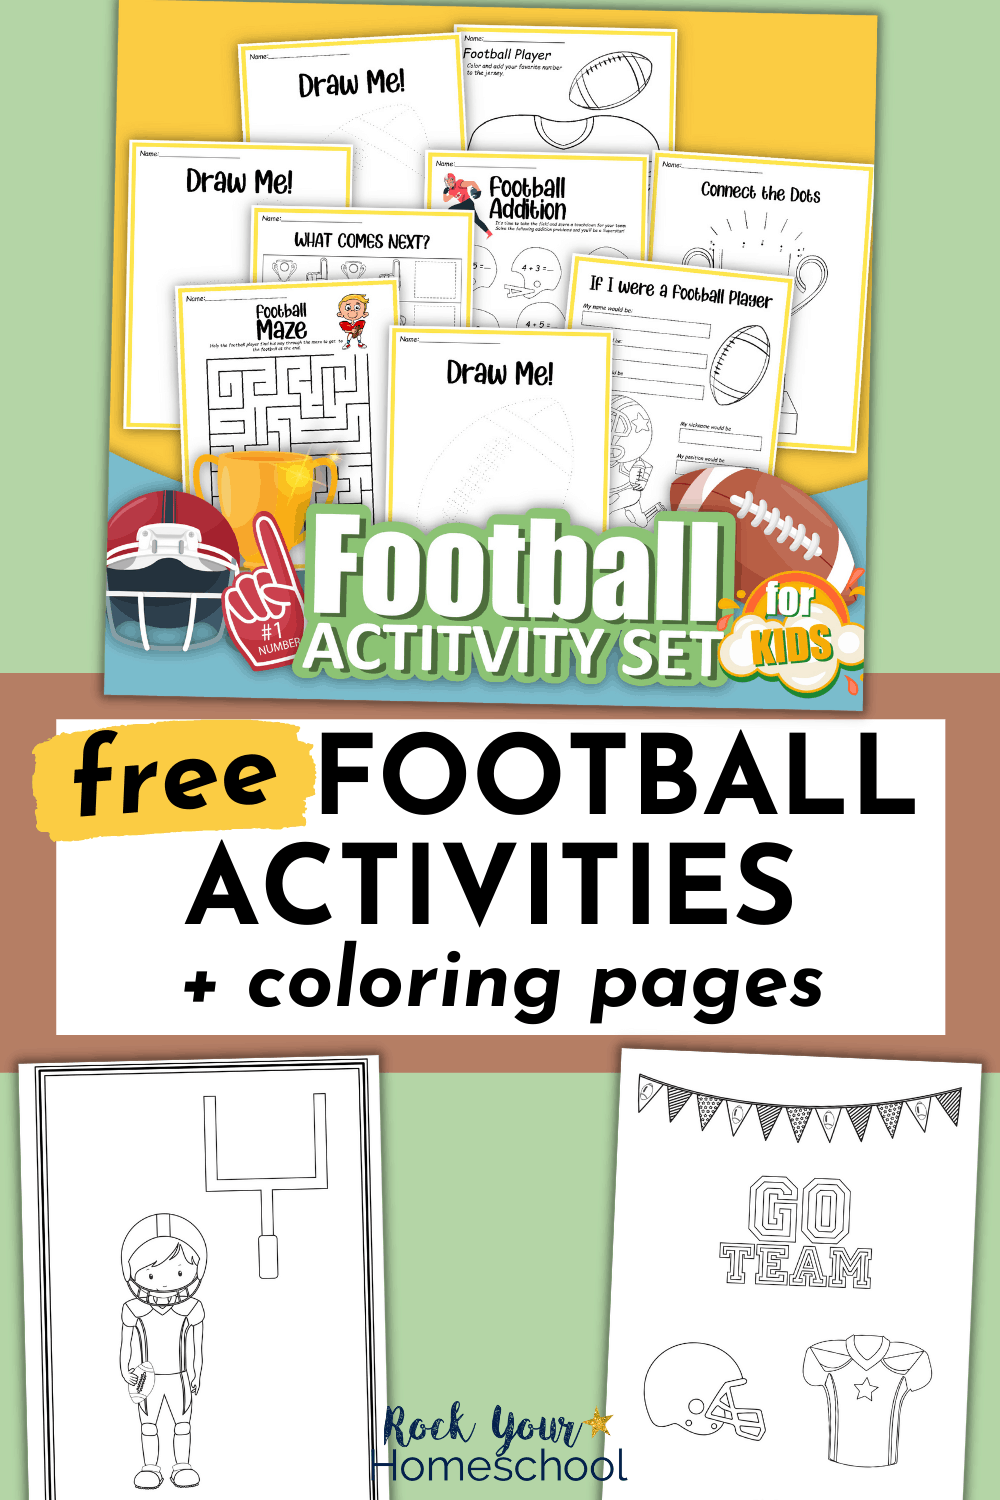 Free Football Printables Pack Full of Coloring Pages and Fun Activities